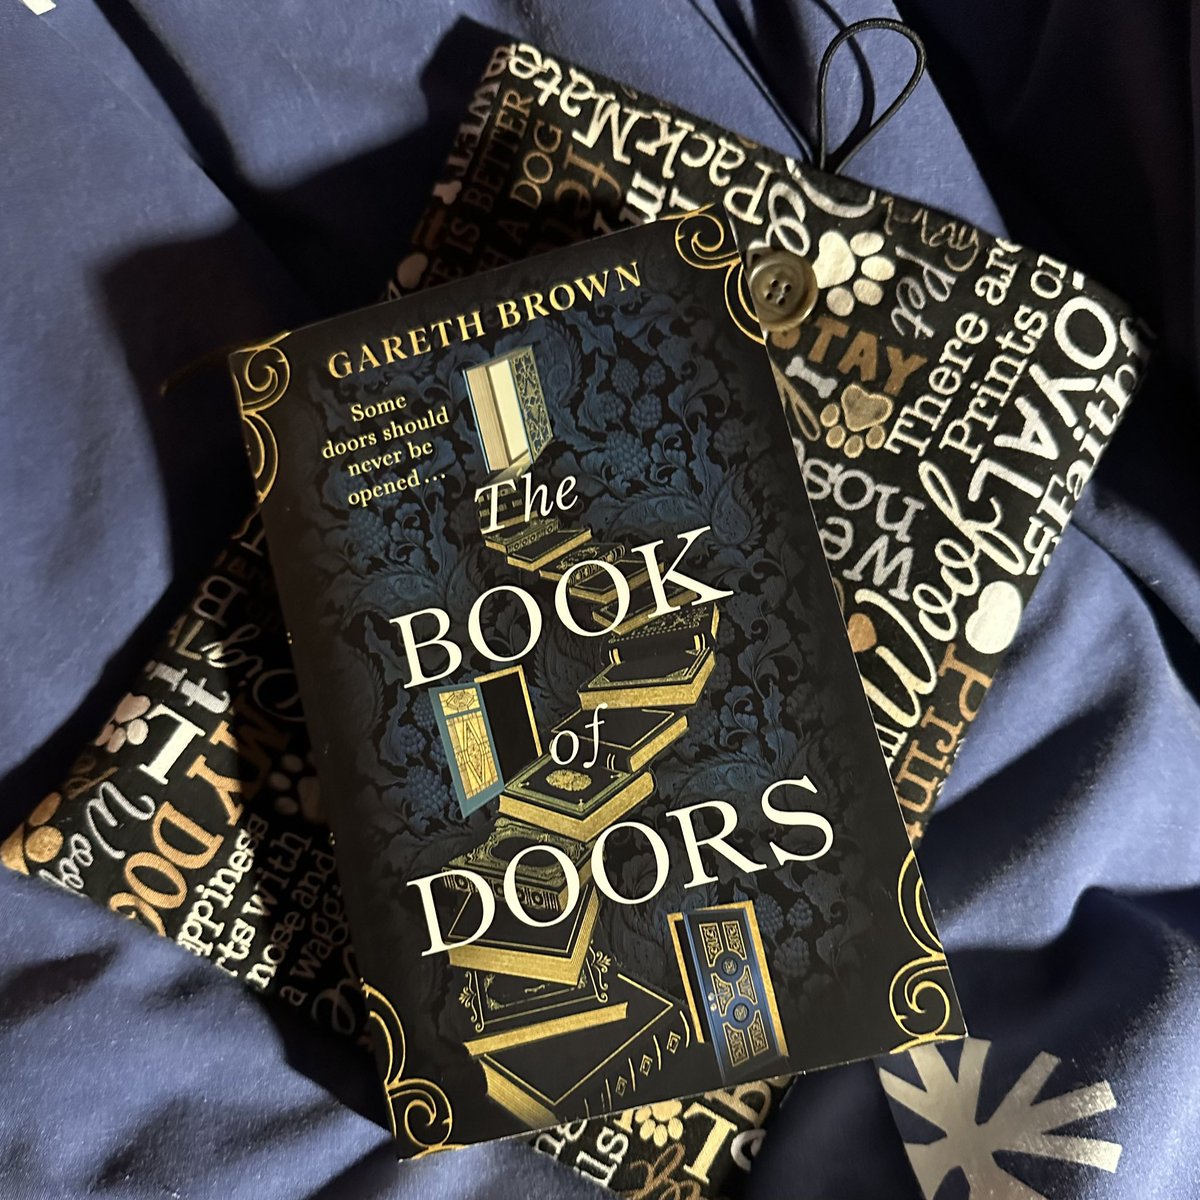 Have spent most of this evening completely engrossed in this book, so much so that I’m not sure if I can go to sleep without knowing how it ends!

#TheBookOfDoors #BookTwitter #Bookblogger #CantStopReading